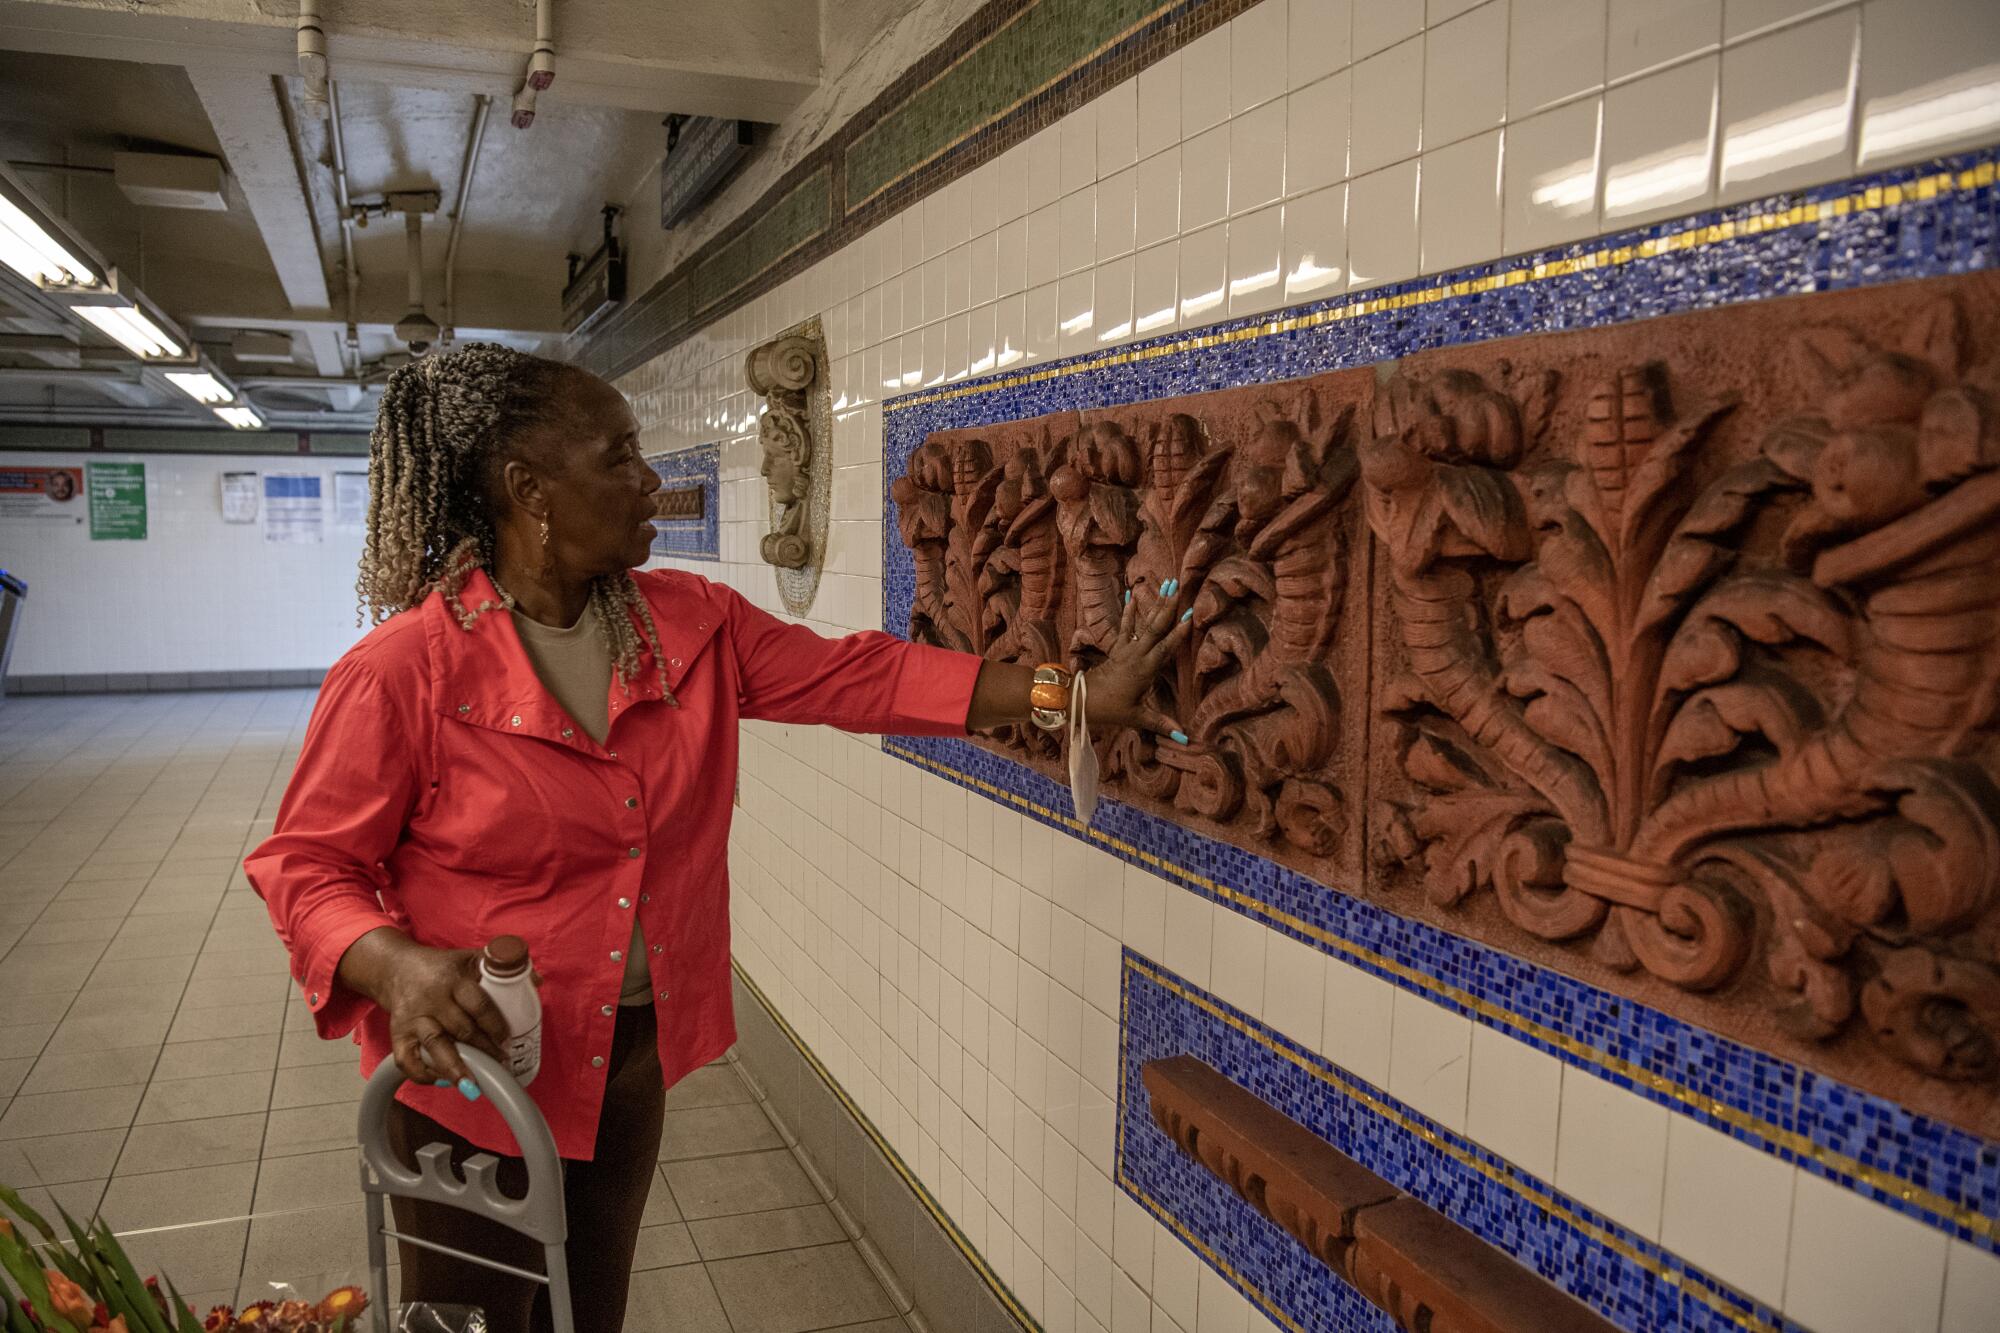 A woman reaching out to touch a large terra cotta relief surrounded by small blue tiles on a subway wall